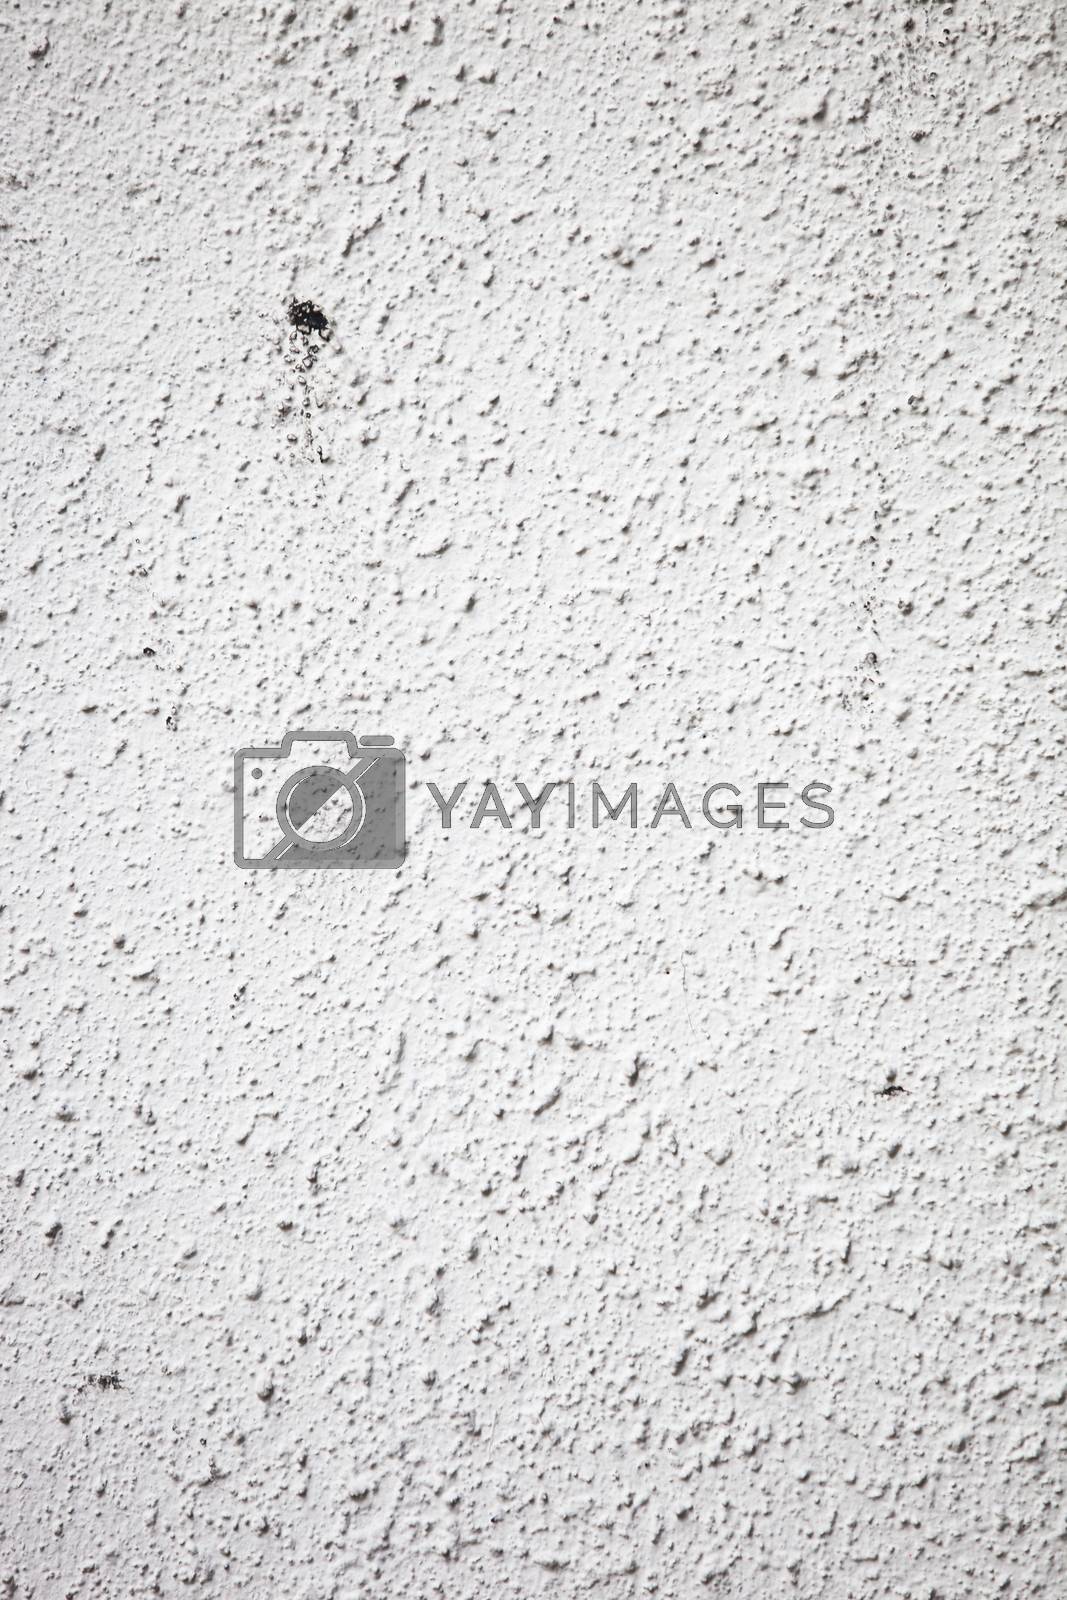 Royalty free image of Full frame shot of white wall by moodboard